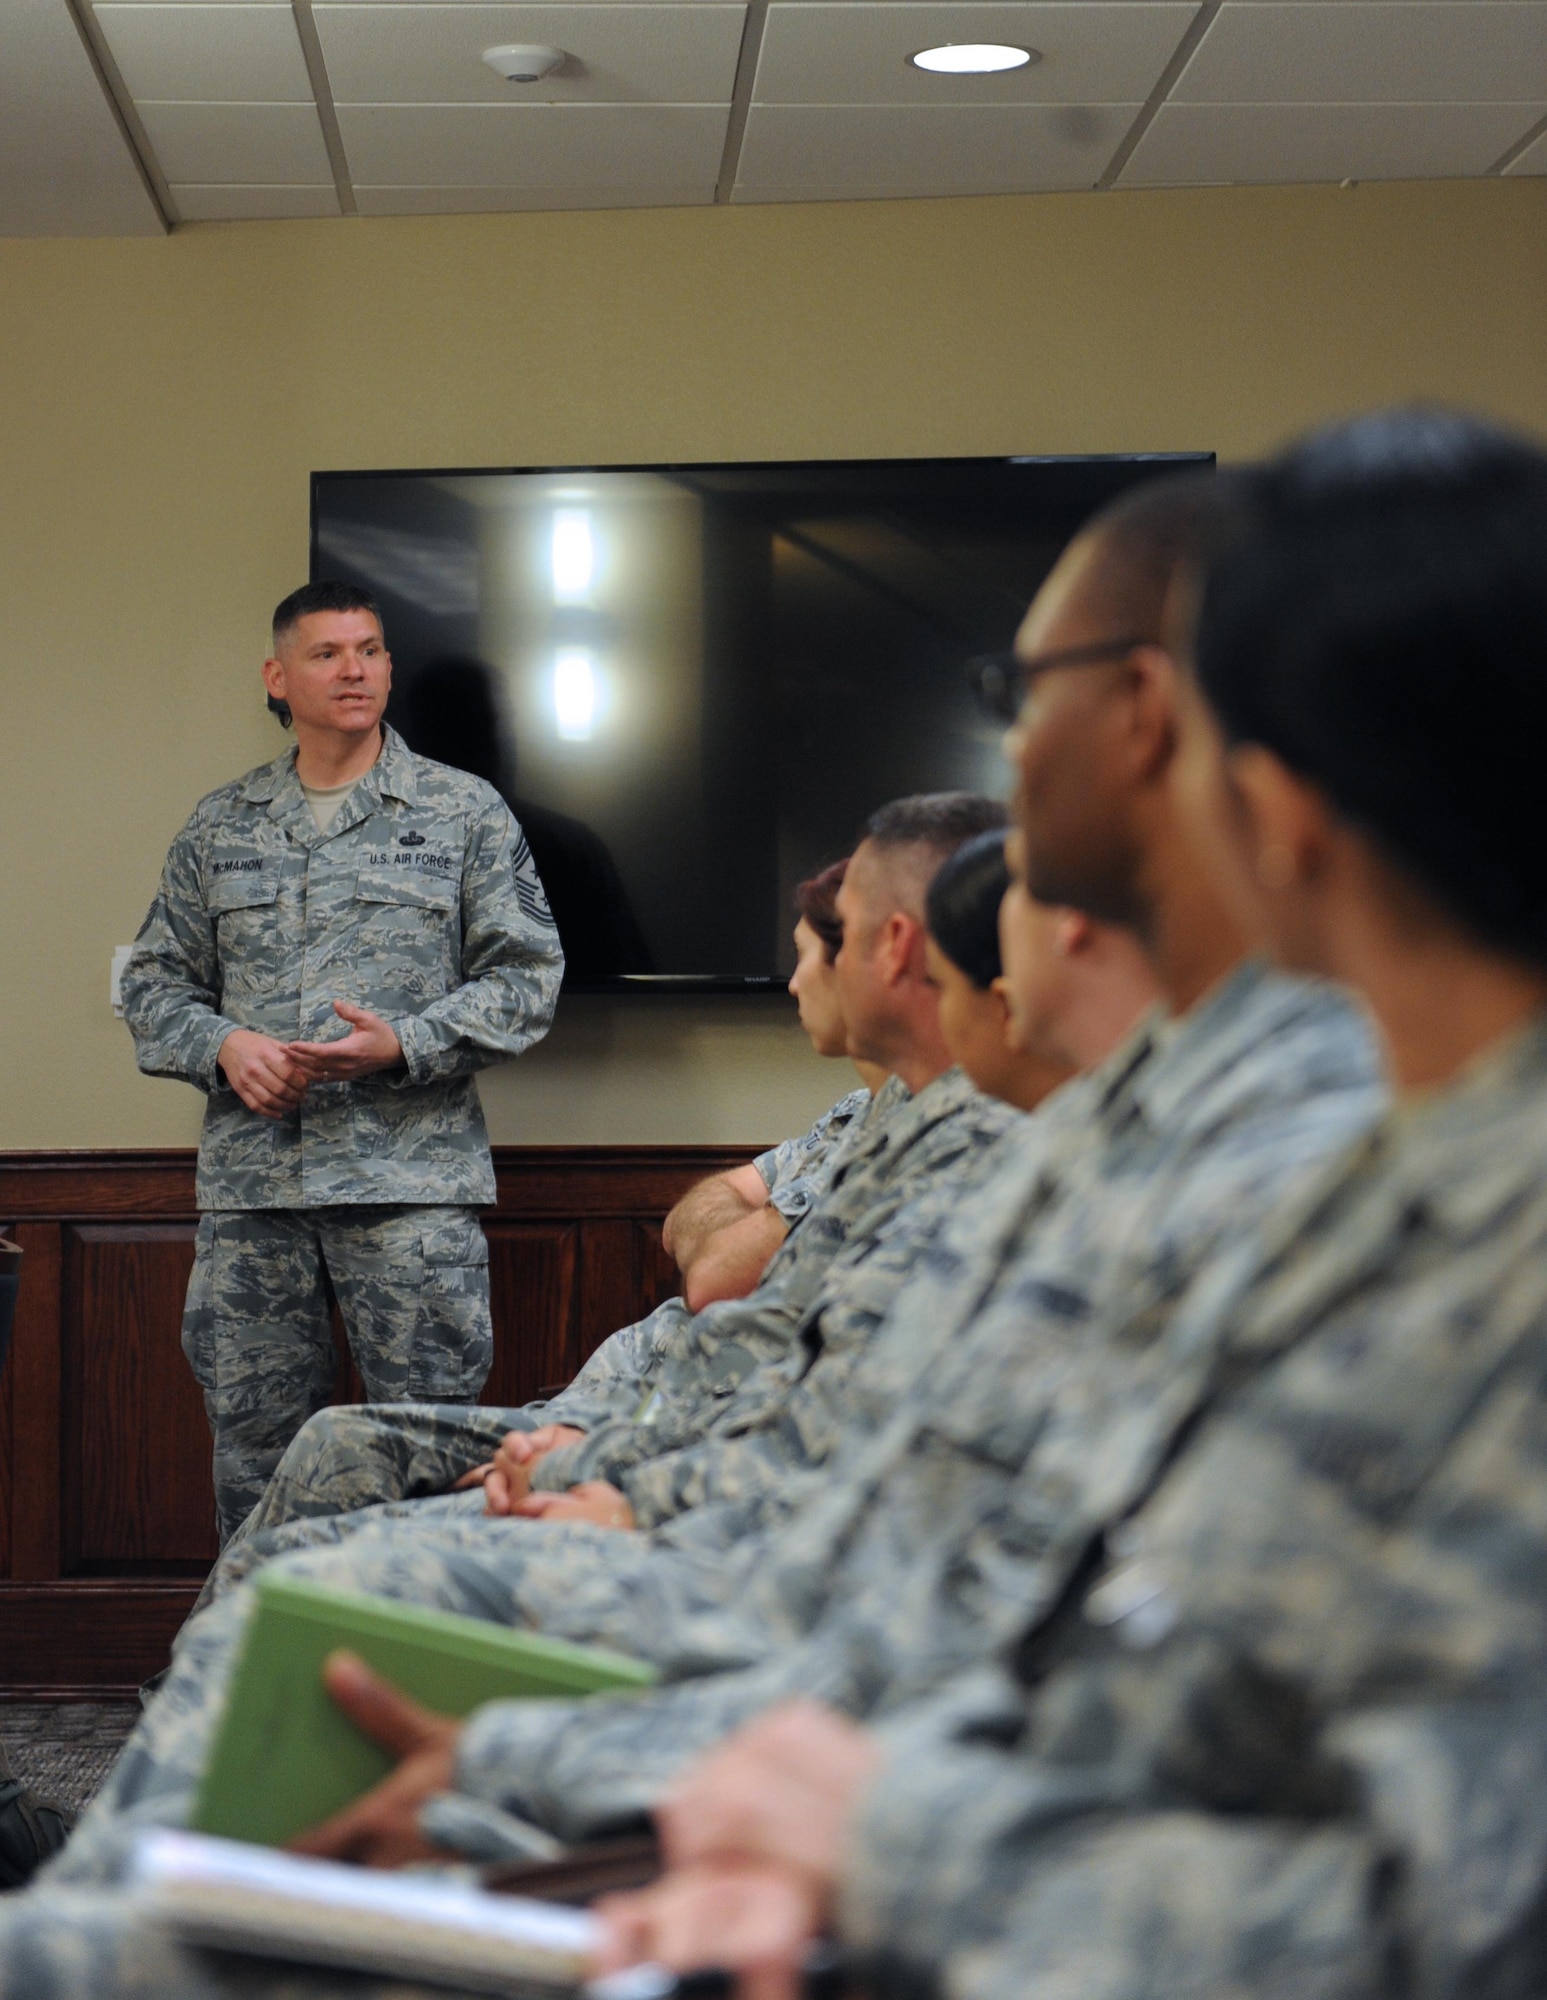 Chief Master Sgt. Patrick McMahon, U.S. Strategic Command (USSTRATCOM) senior enlisted leader, speaks with noncommissioned and senior noncommissioned officers at Headquarters Eighth Air Force, Barksdale Air Force Base, La., April 3, 2017. During the question and answer session, McMahon spoke on various topics, such as mission, professionalism, culture, leadership, and personal development. McMahon advises the USSTRATCOM commander on the health and welfare of the nation’s strategic deterrent forces. (U.S. Air Force photo by Senior Airman Erin Trower)